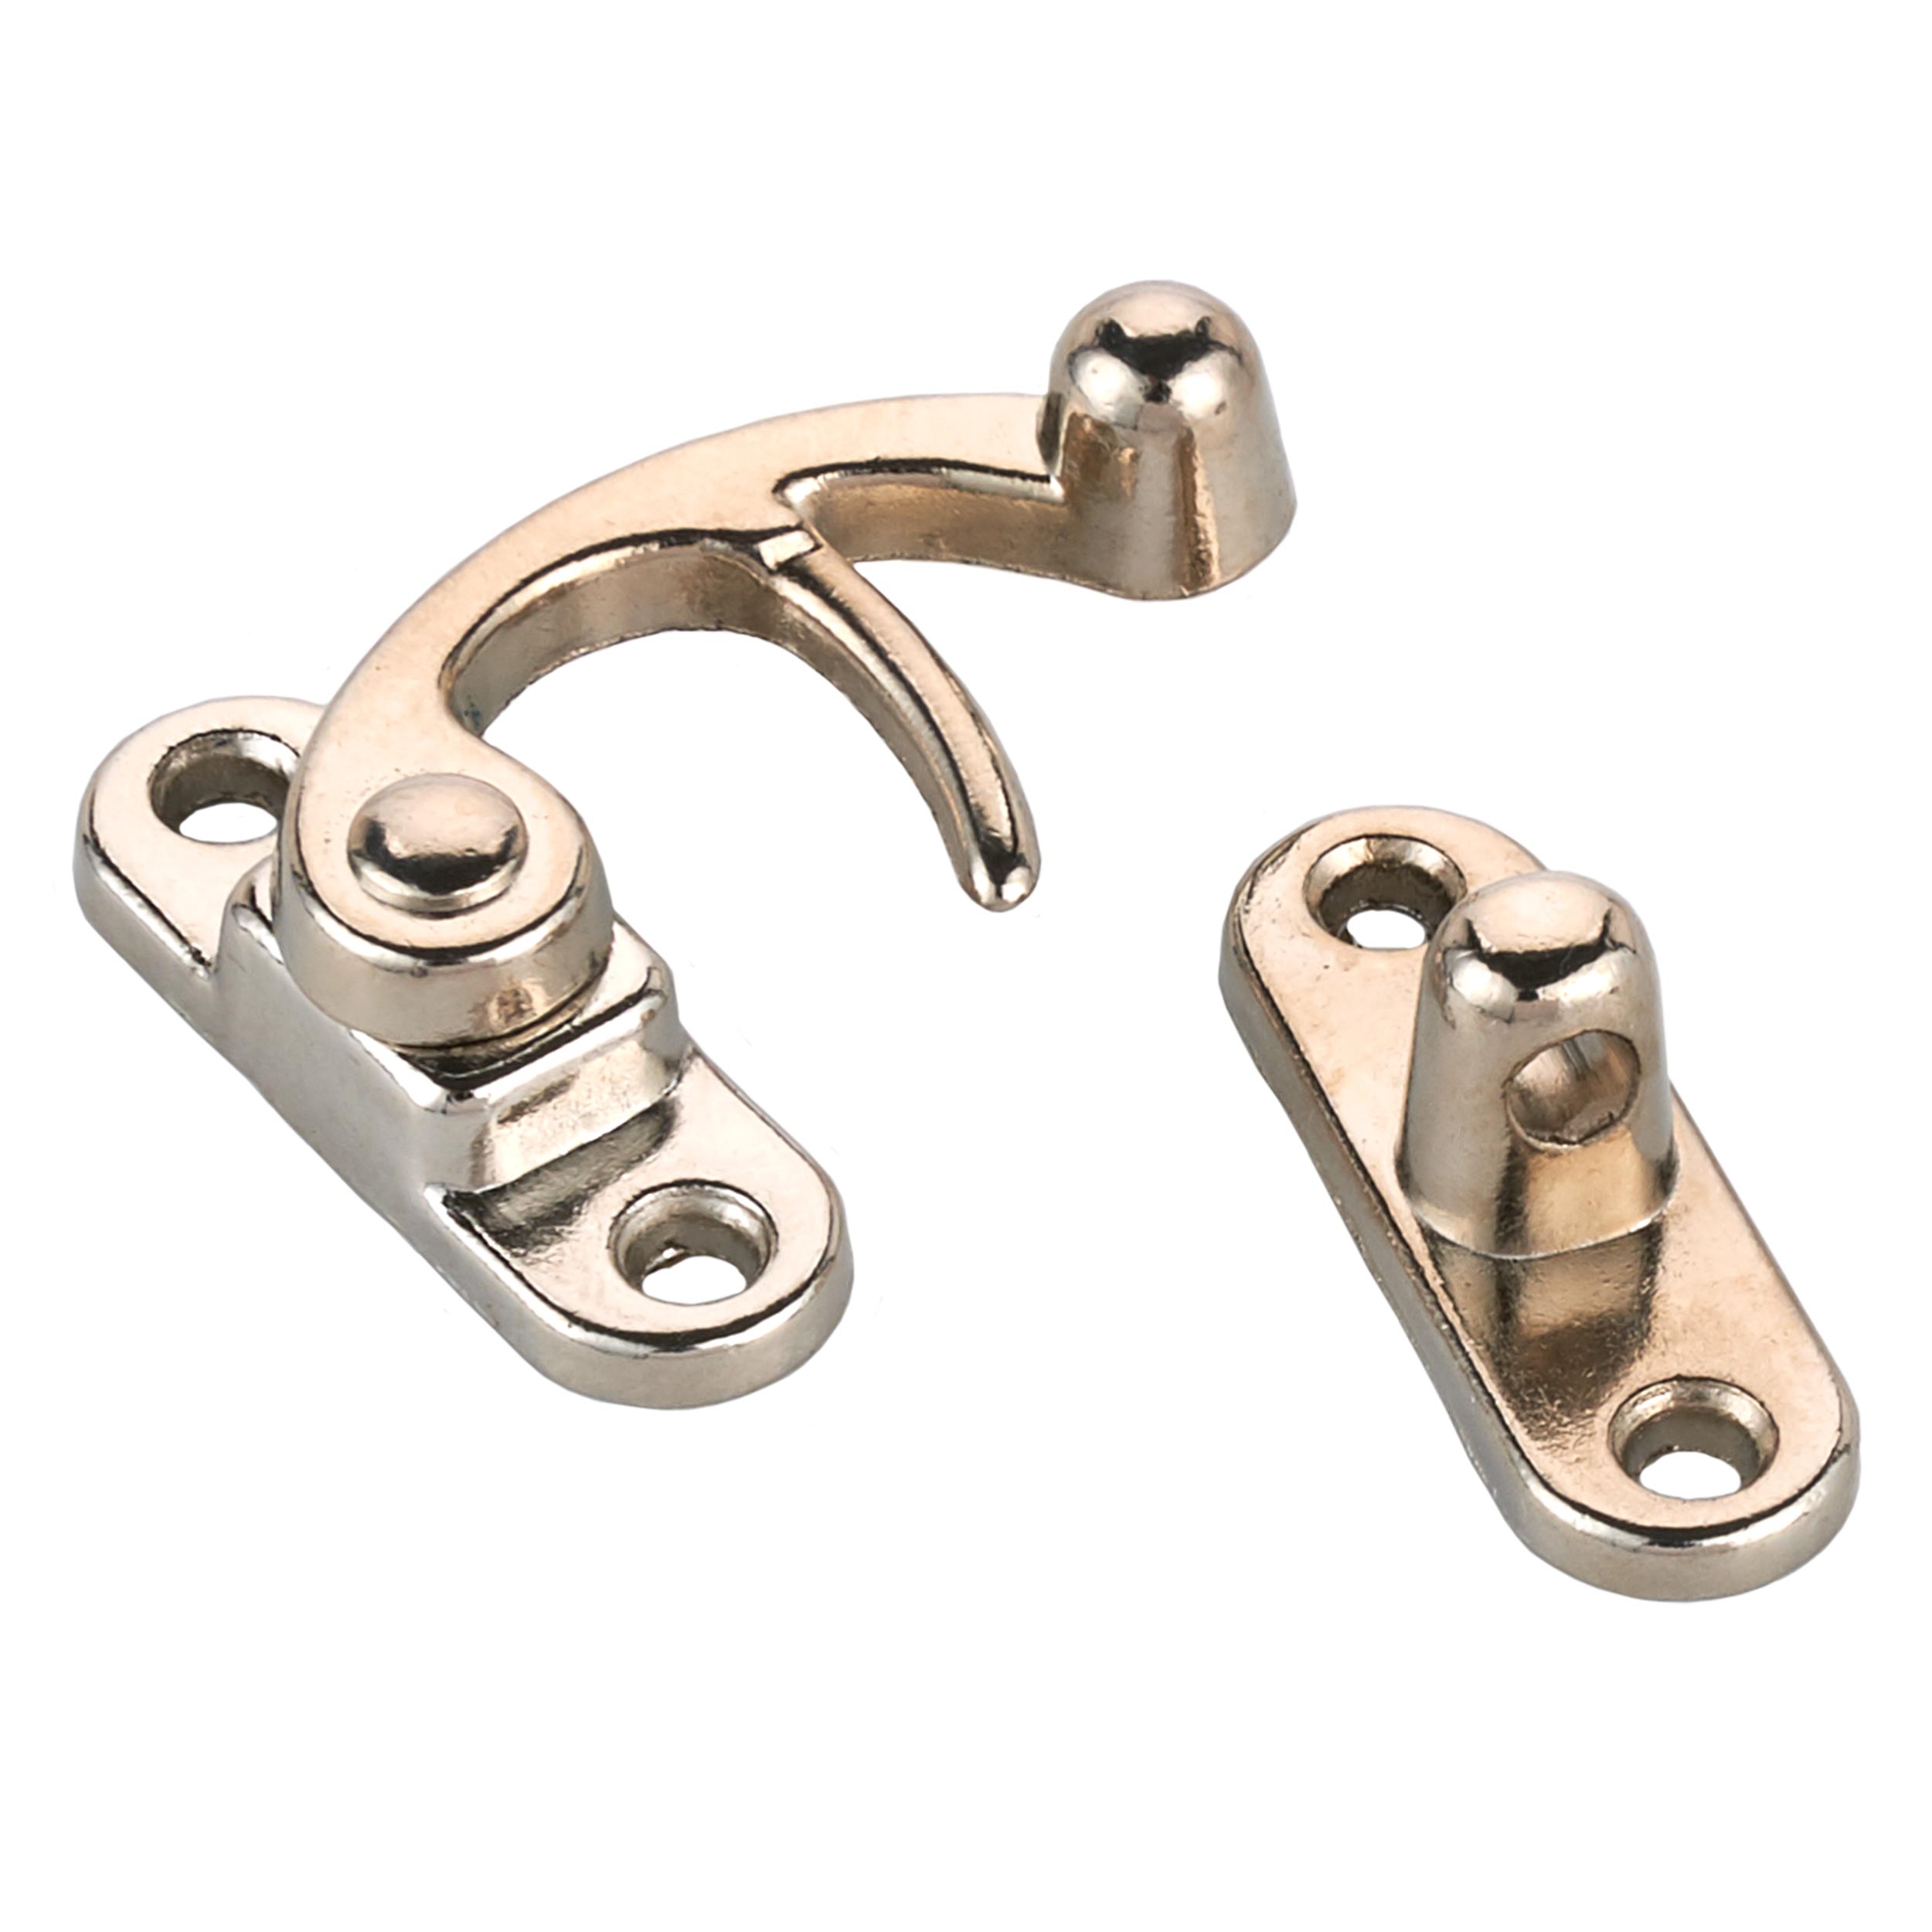 Hook Latch Small Nickel Finish 1-piece With Screws